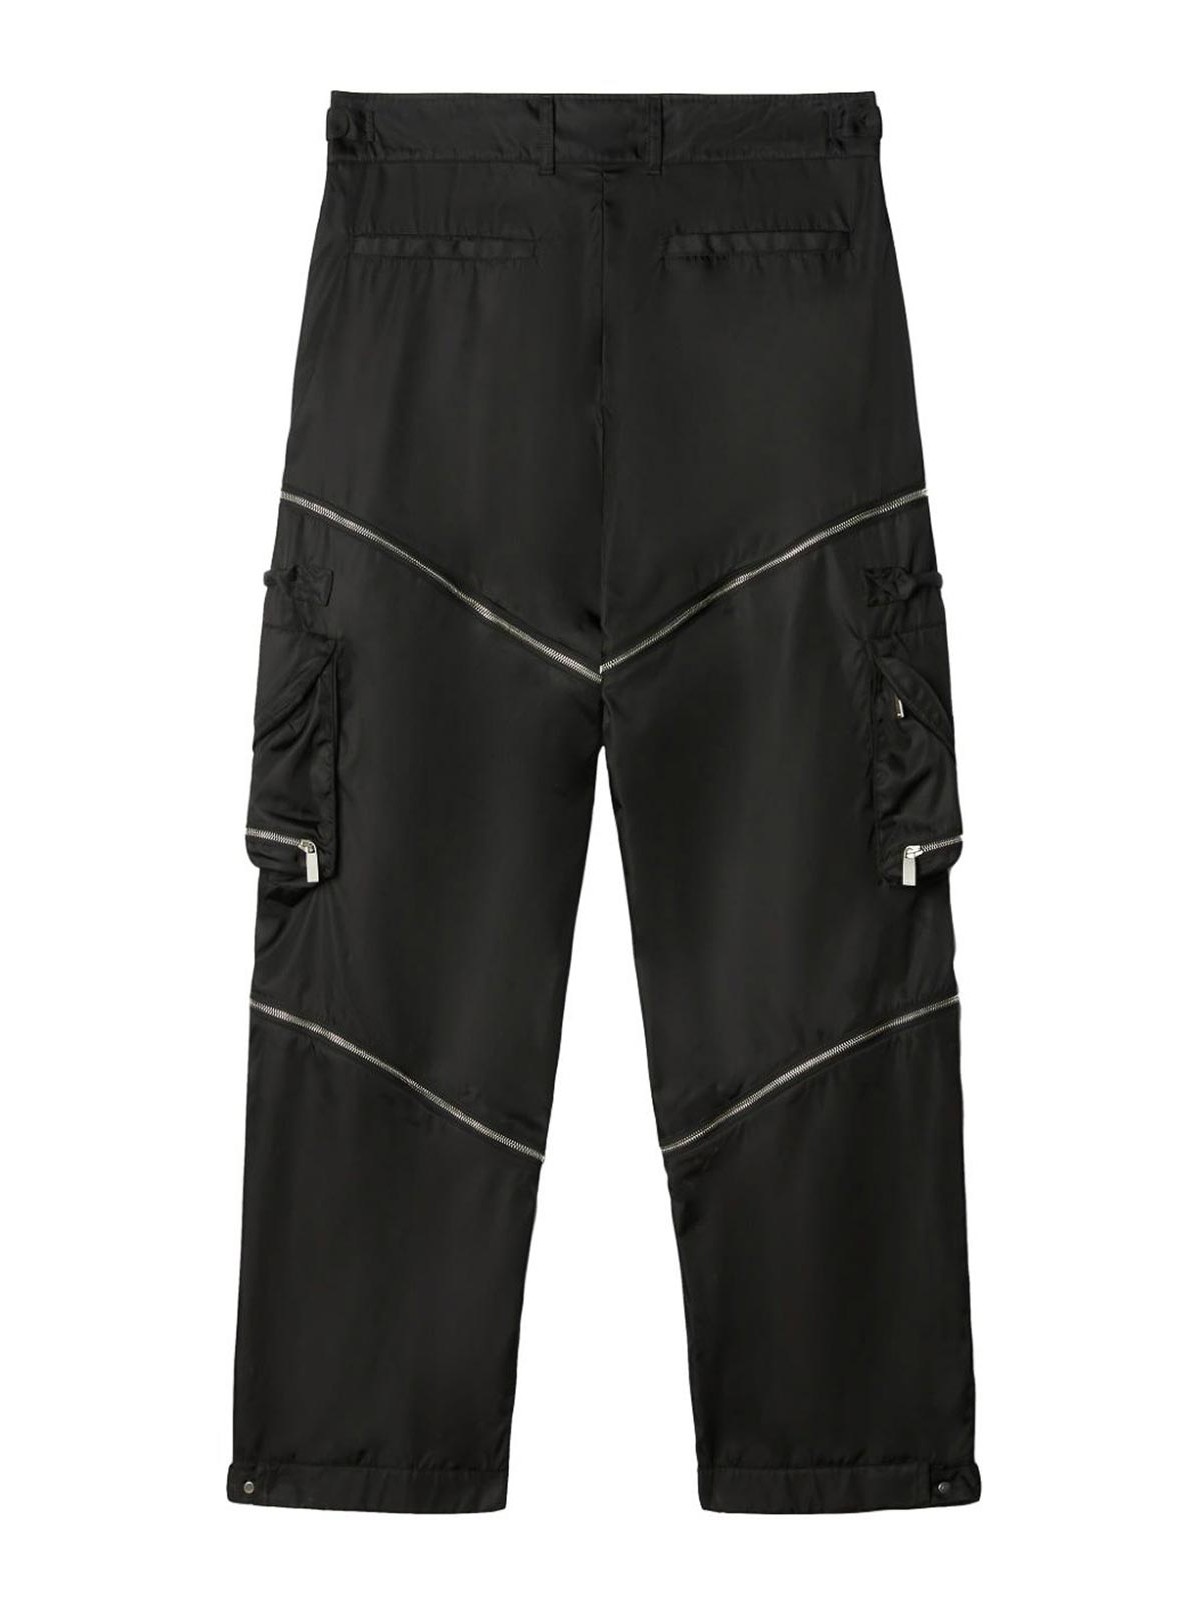 Off White Solid Pants - Selling Fast at Pantaloons.com